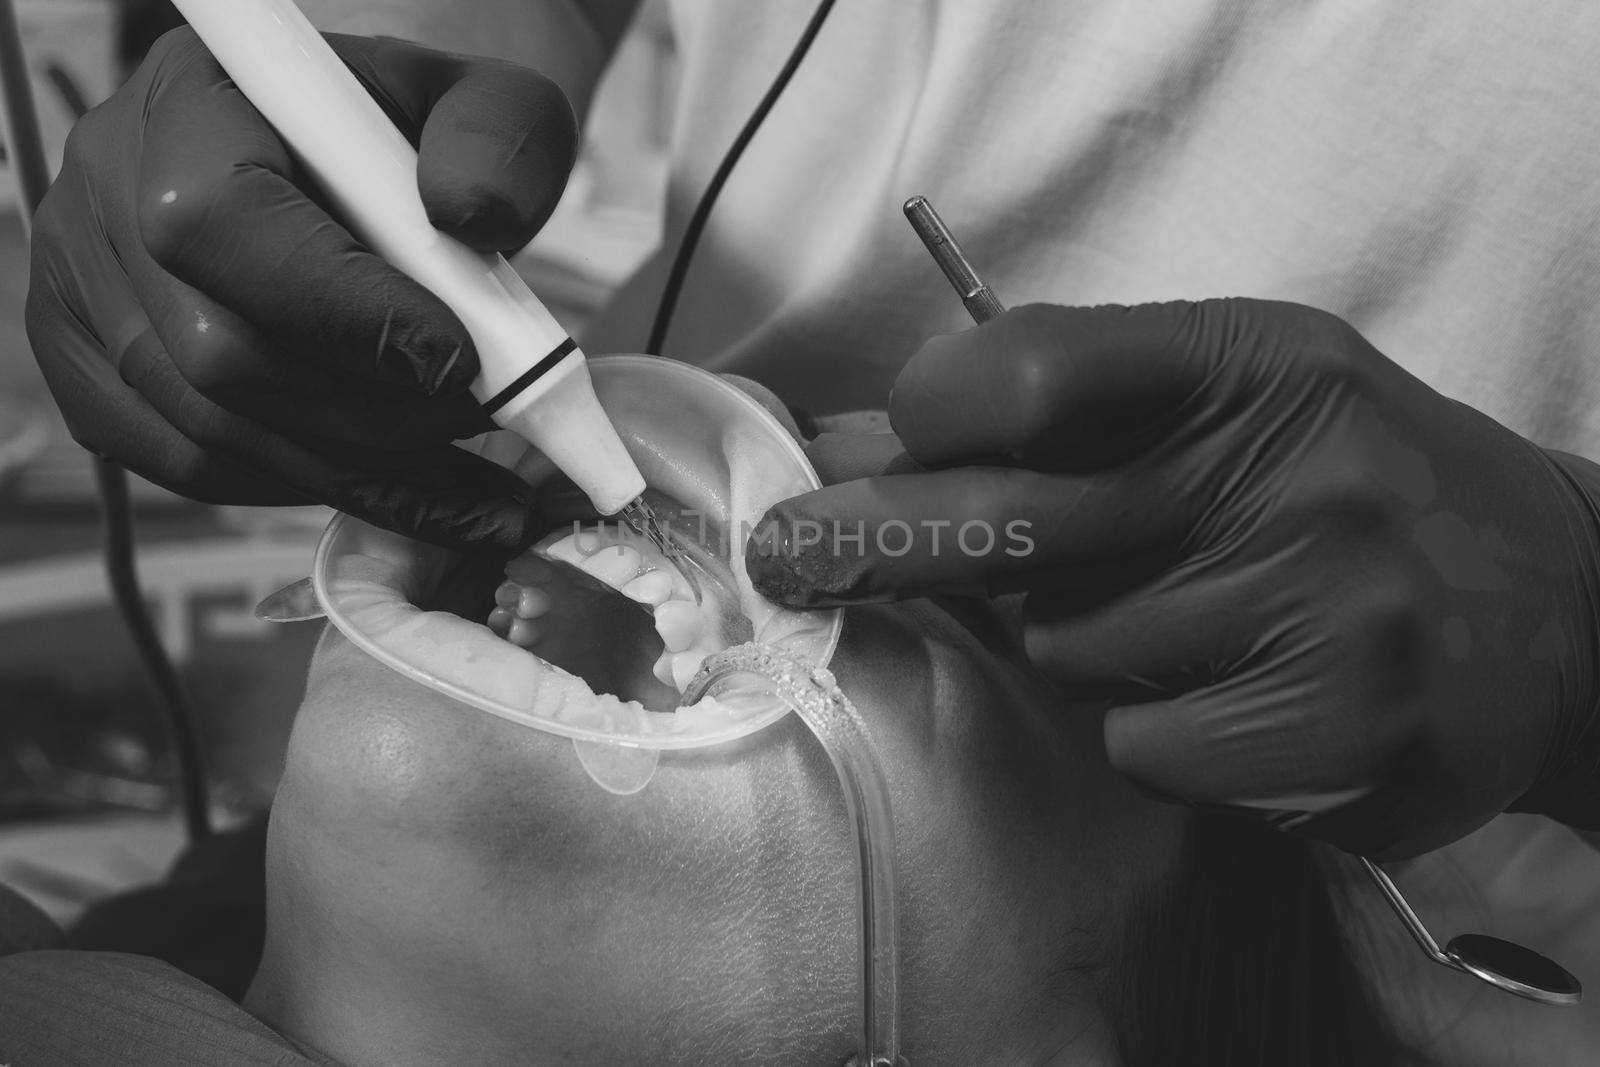 The dentist removes tartar using ultrasound, the patient at the dentist. Retractor for isolation of lips and gums. 2020